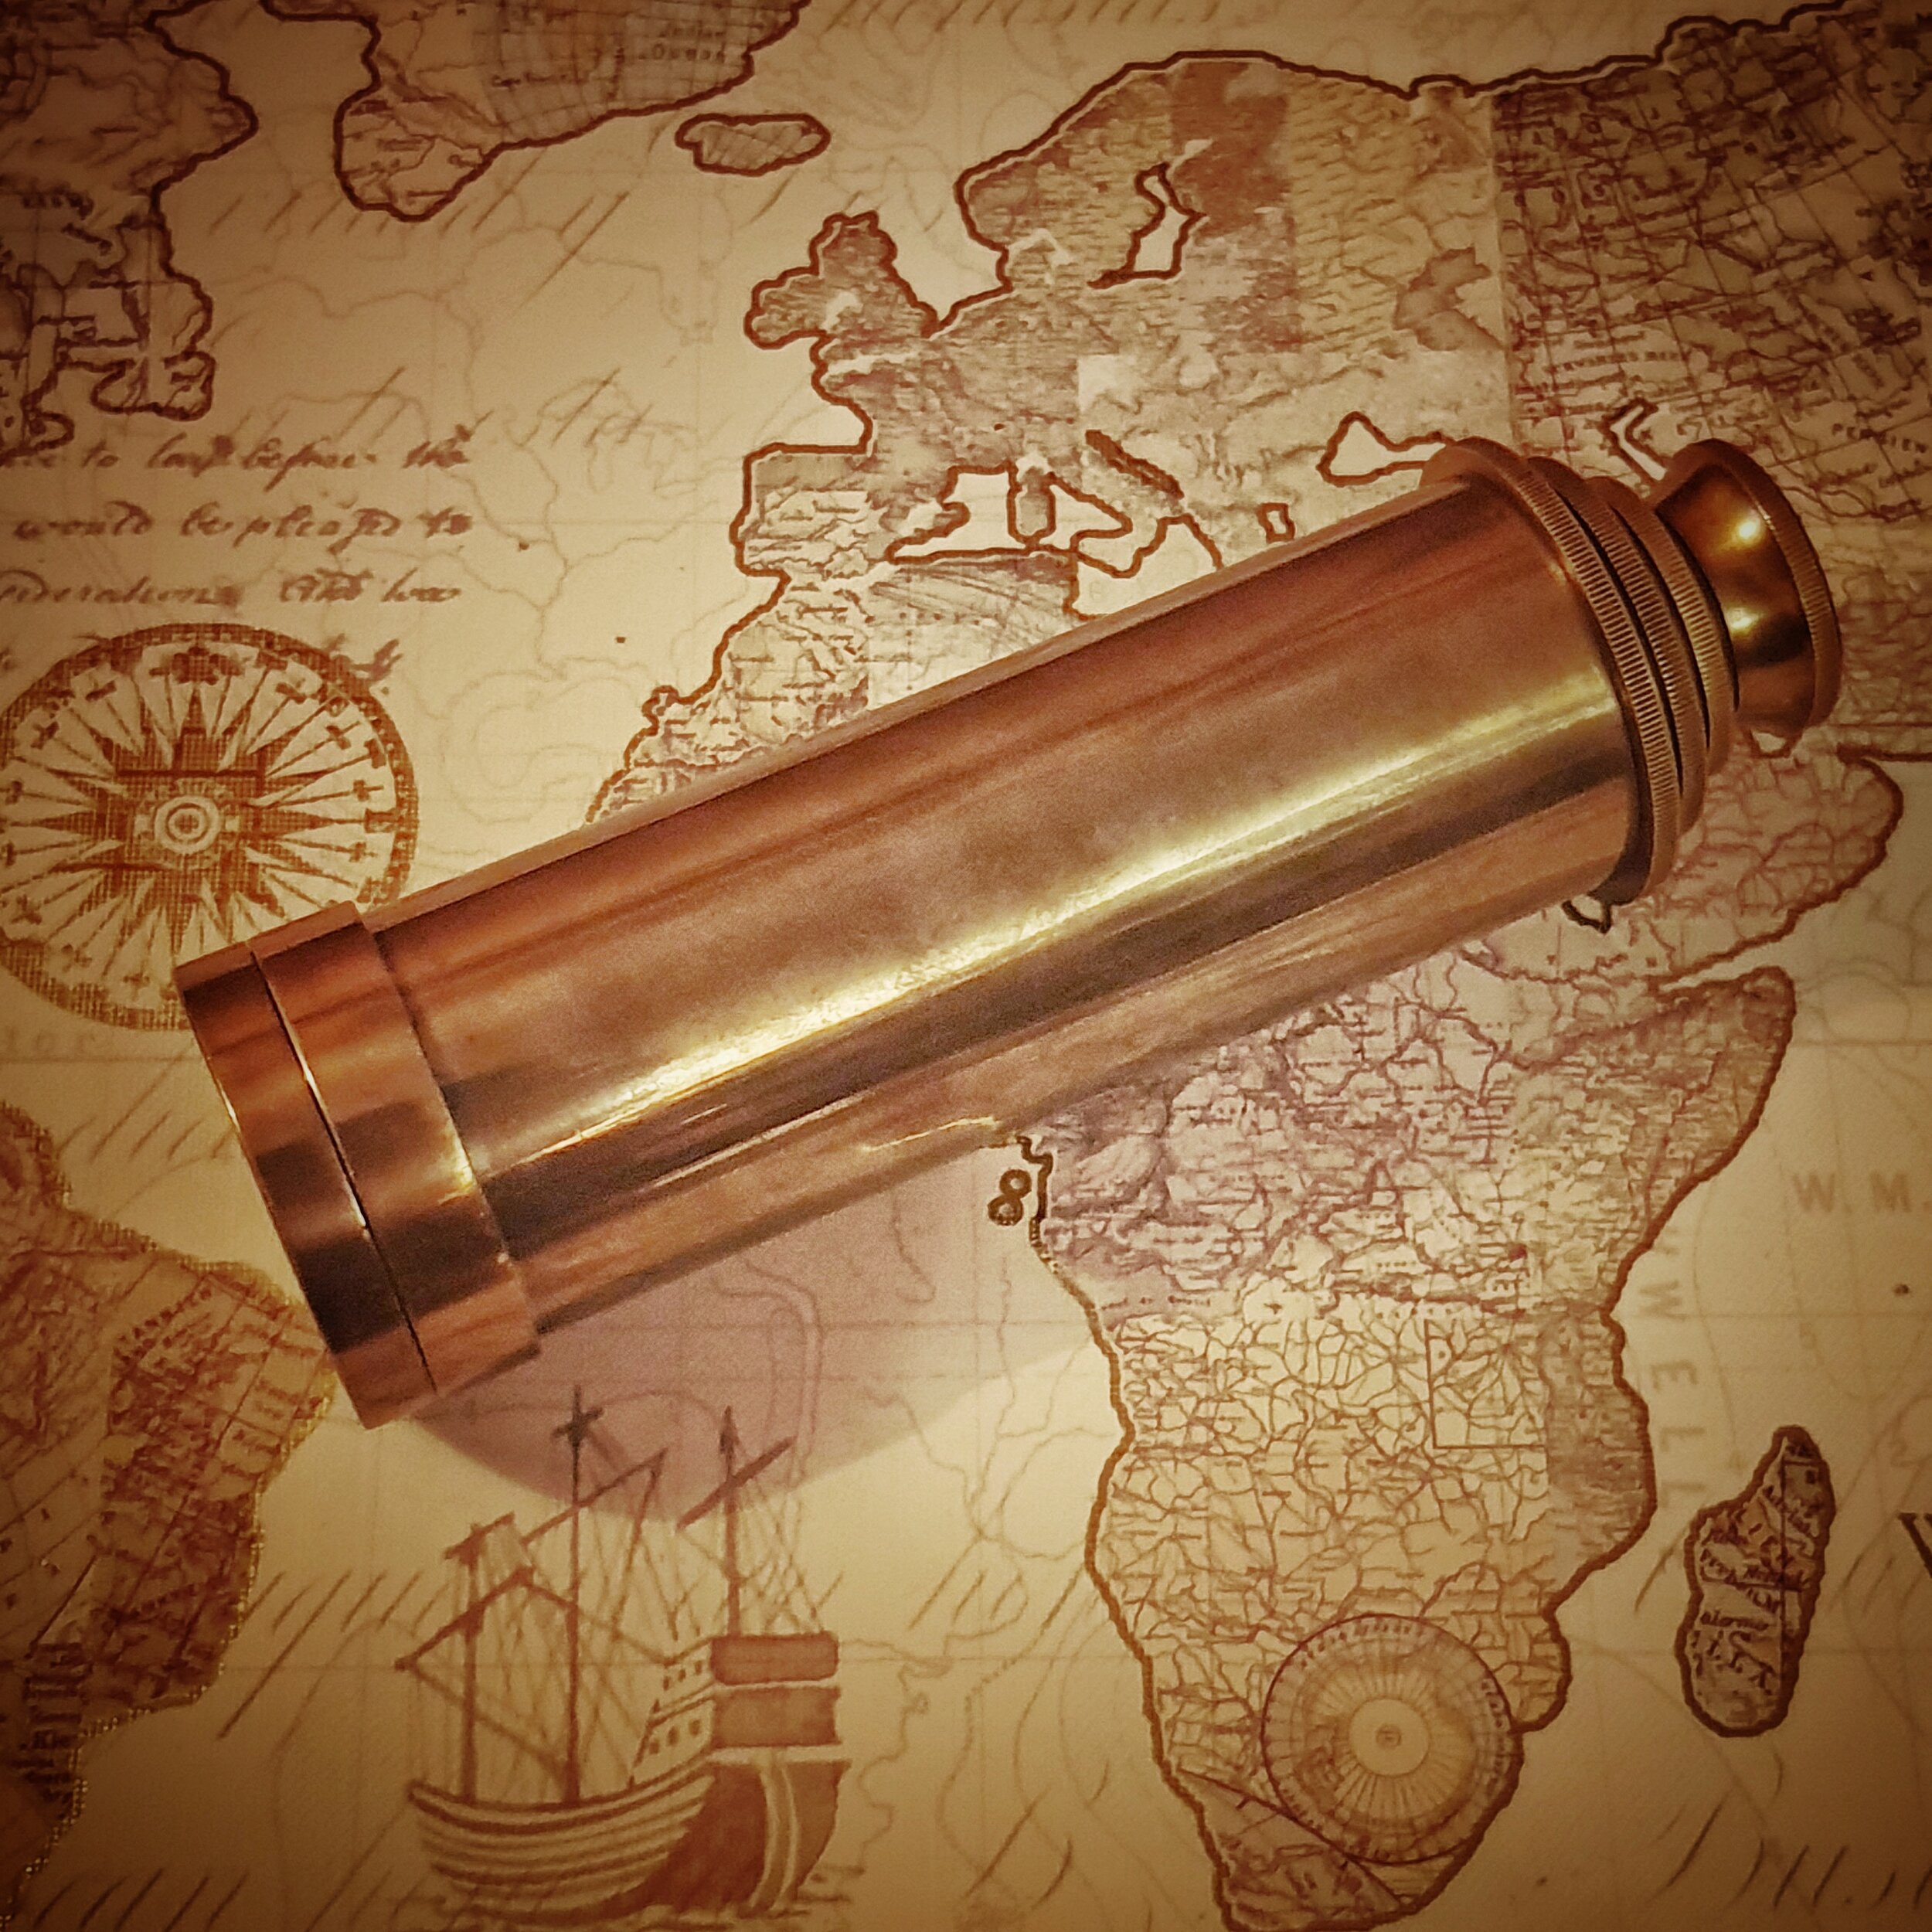 Details about   Antique vintage maritime 6" brass telescope spyglass scope with wooden box gift 